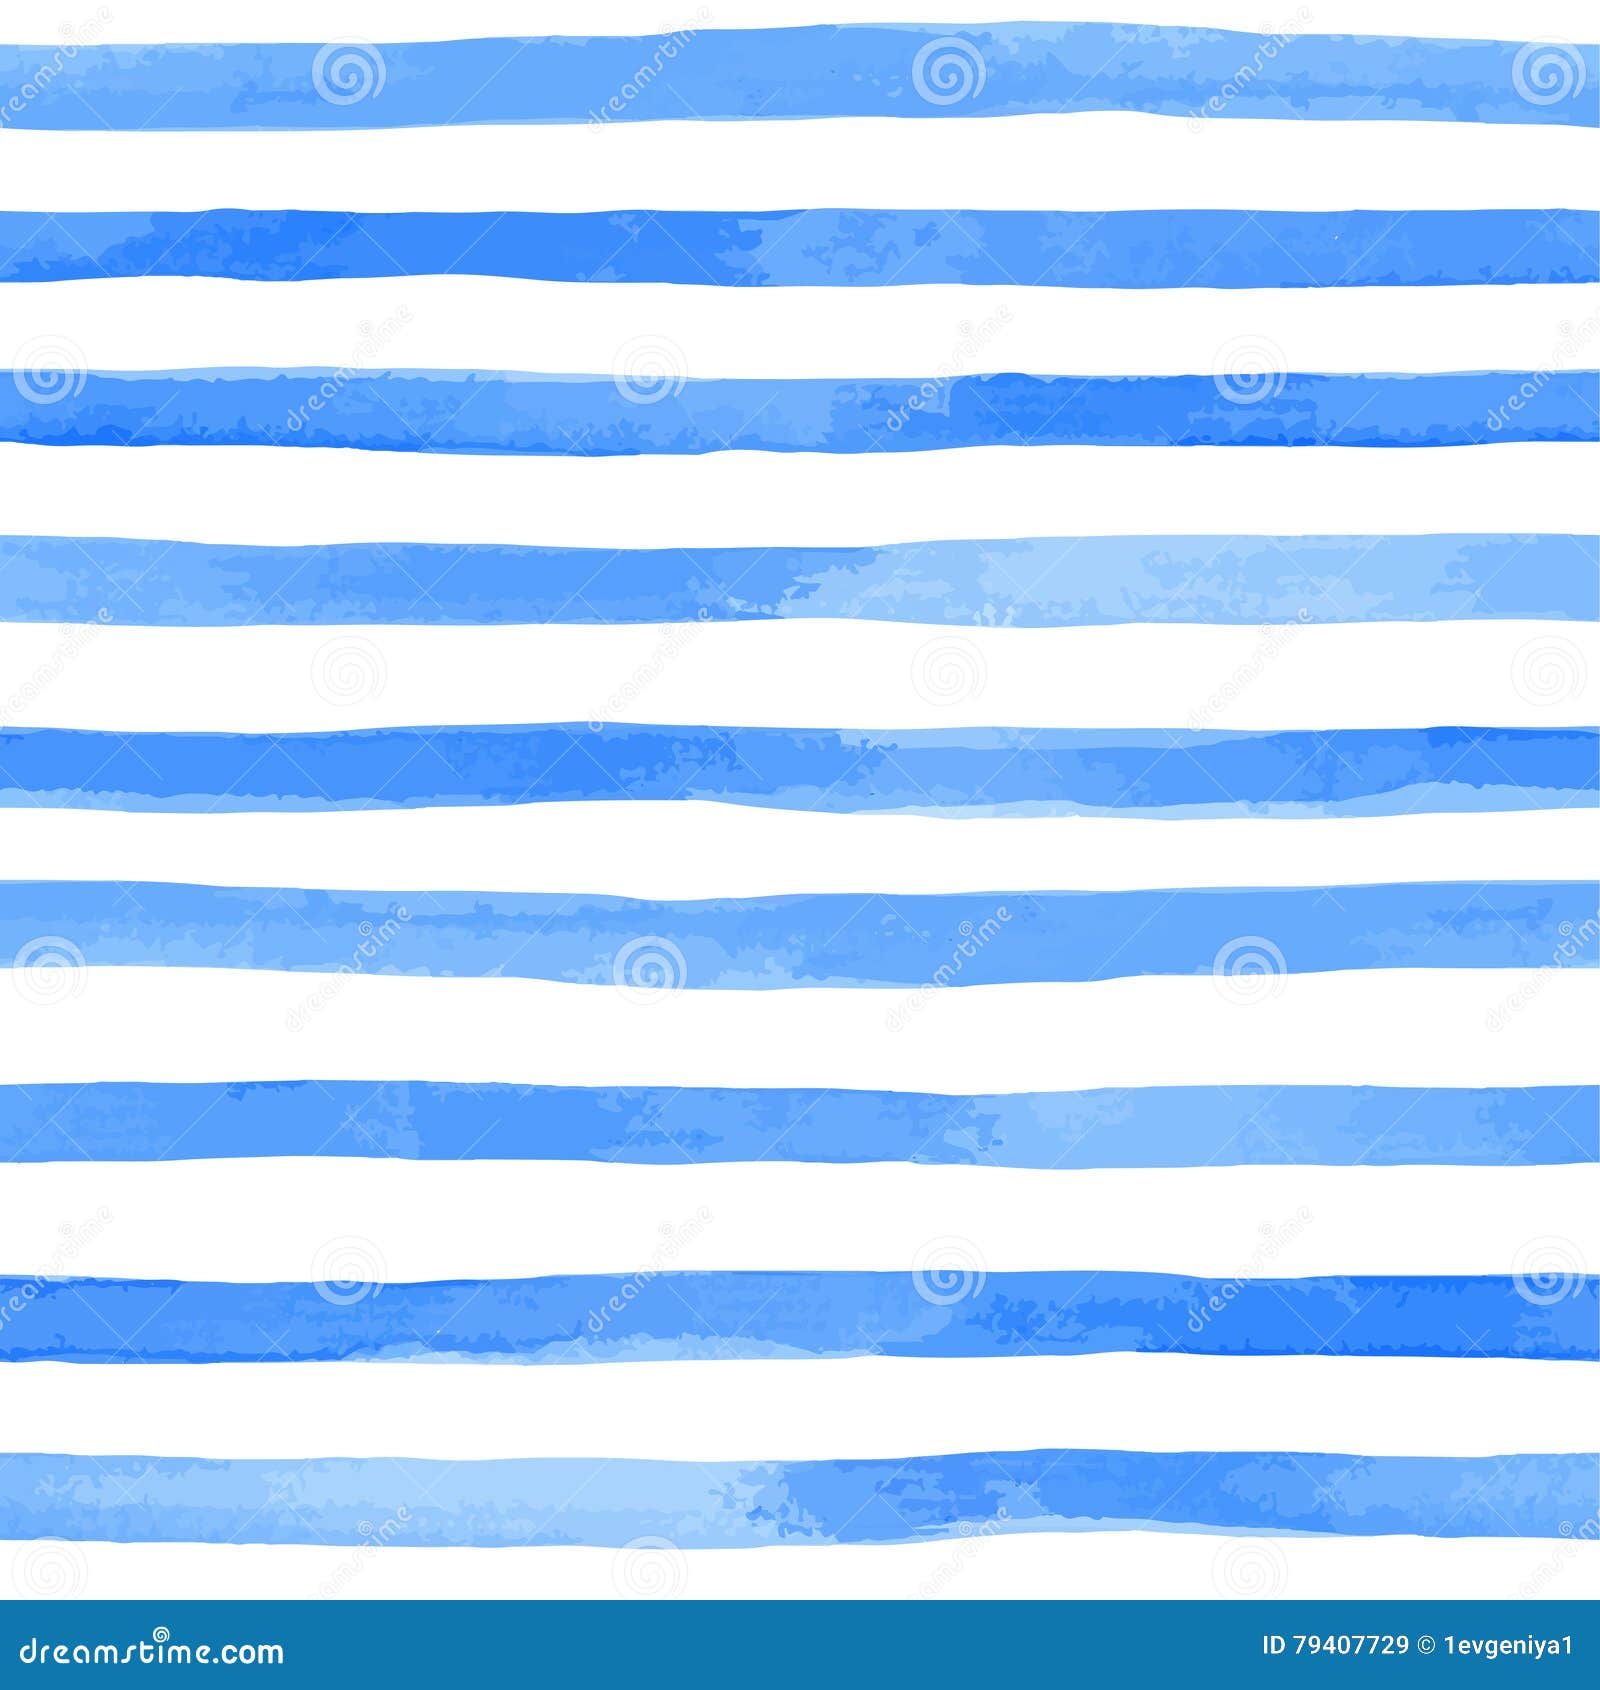 seamless pattern with blue watercolor stripes. hand painted brush strokes, striped background.  